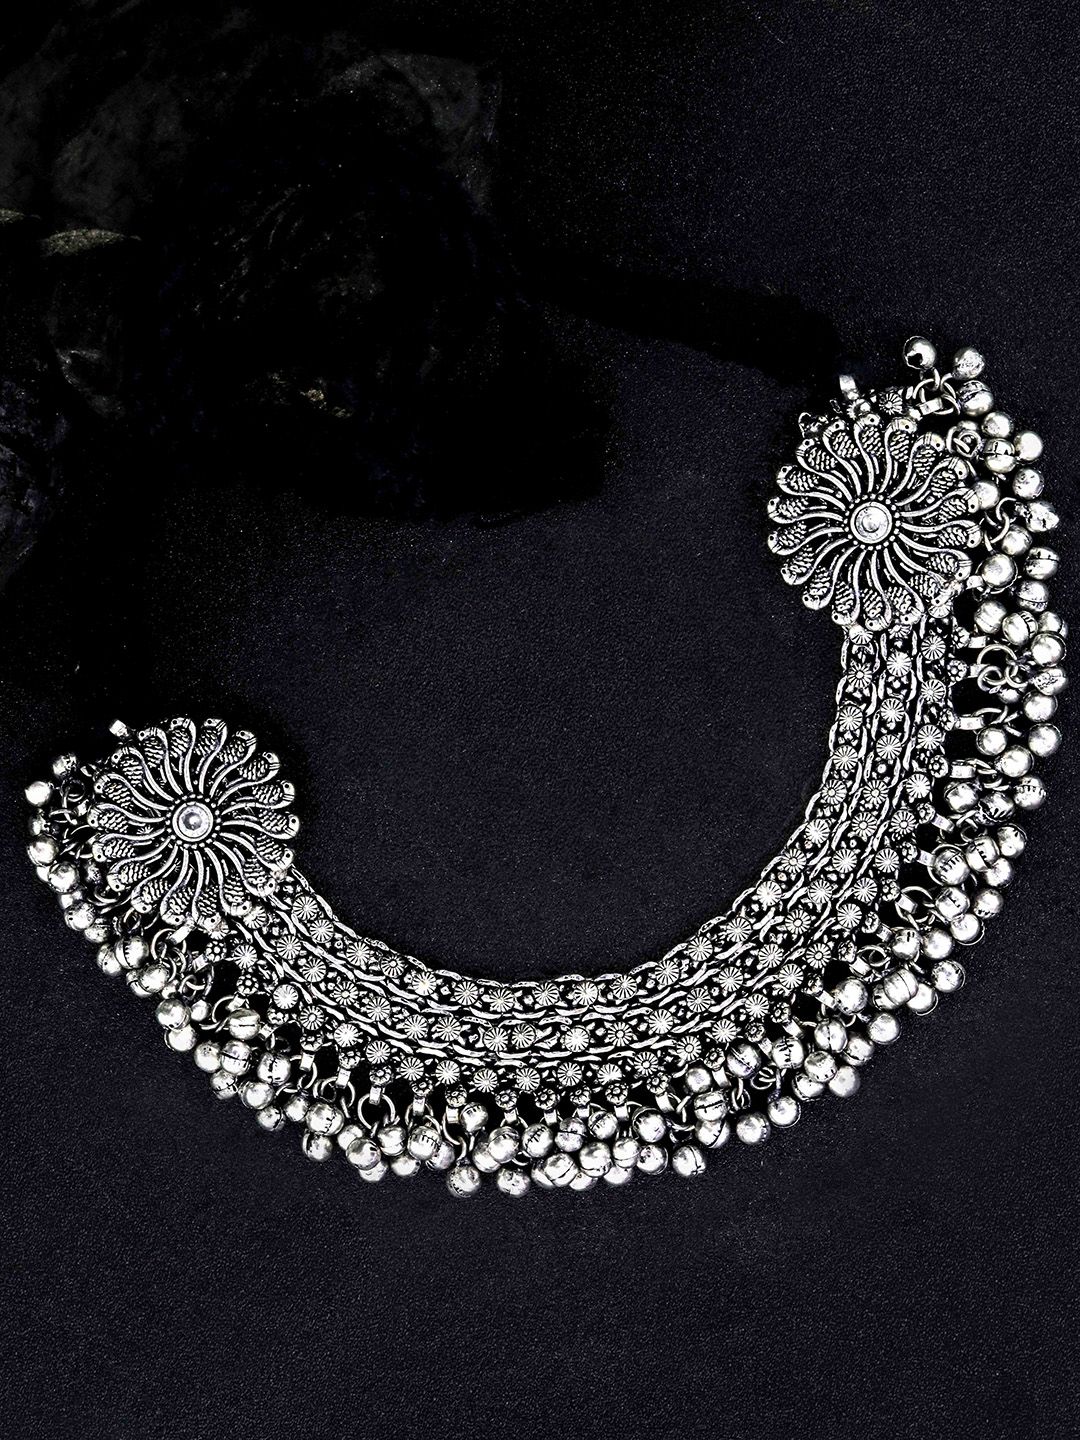 Priyaasi Silver-Toned Oxidised Statement Necklace Price in India